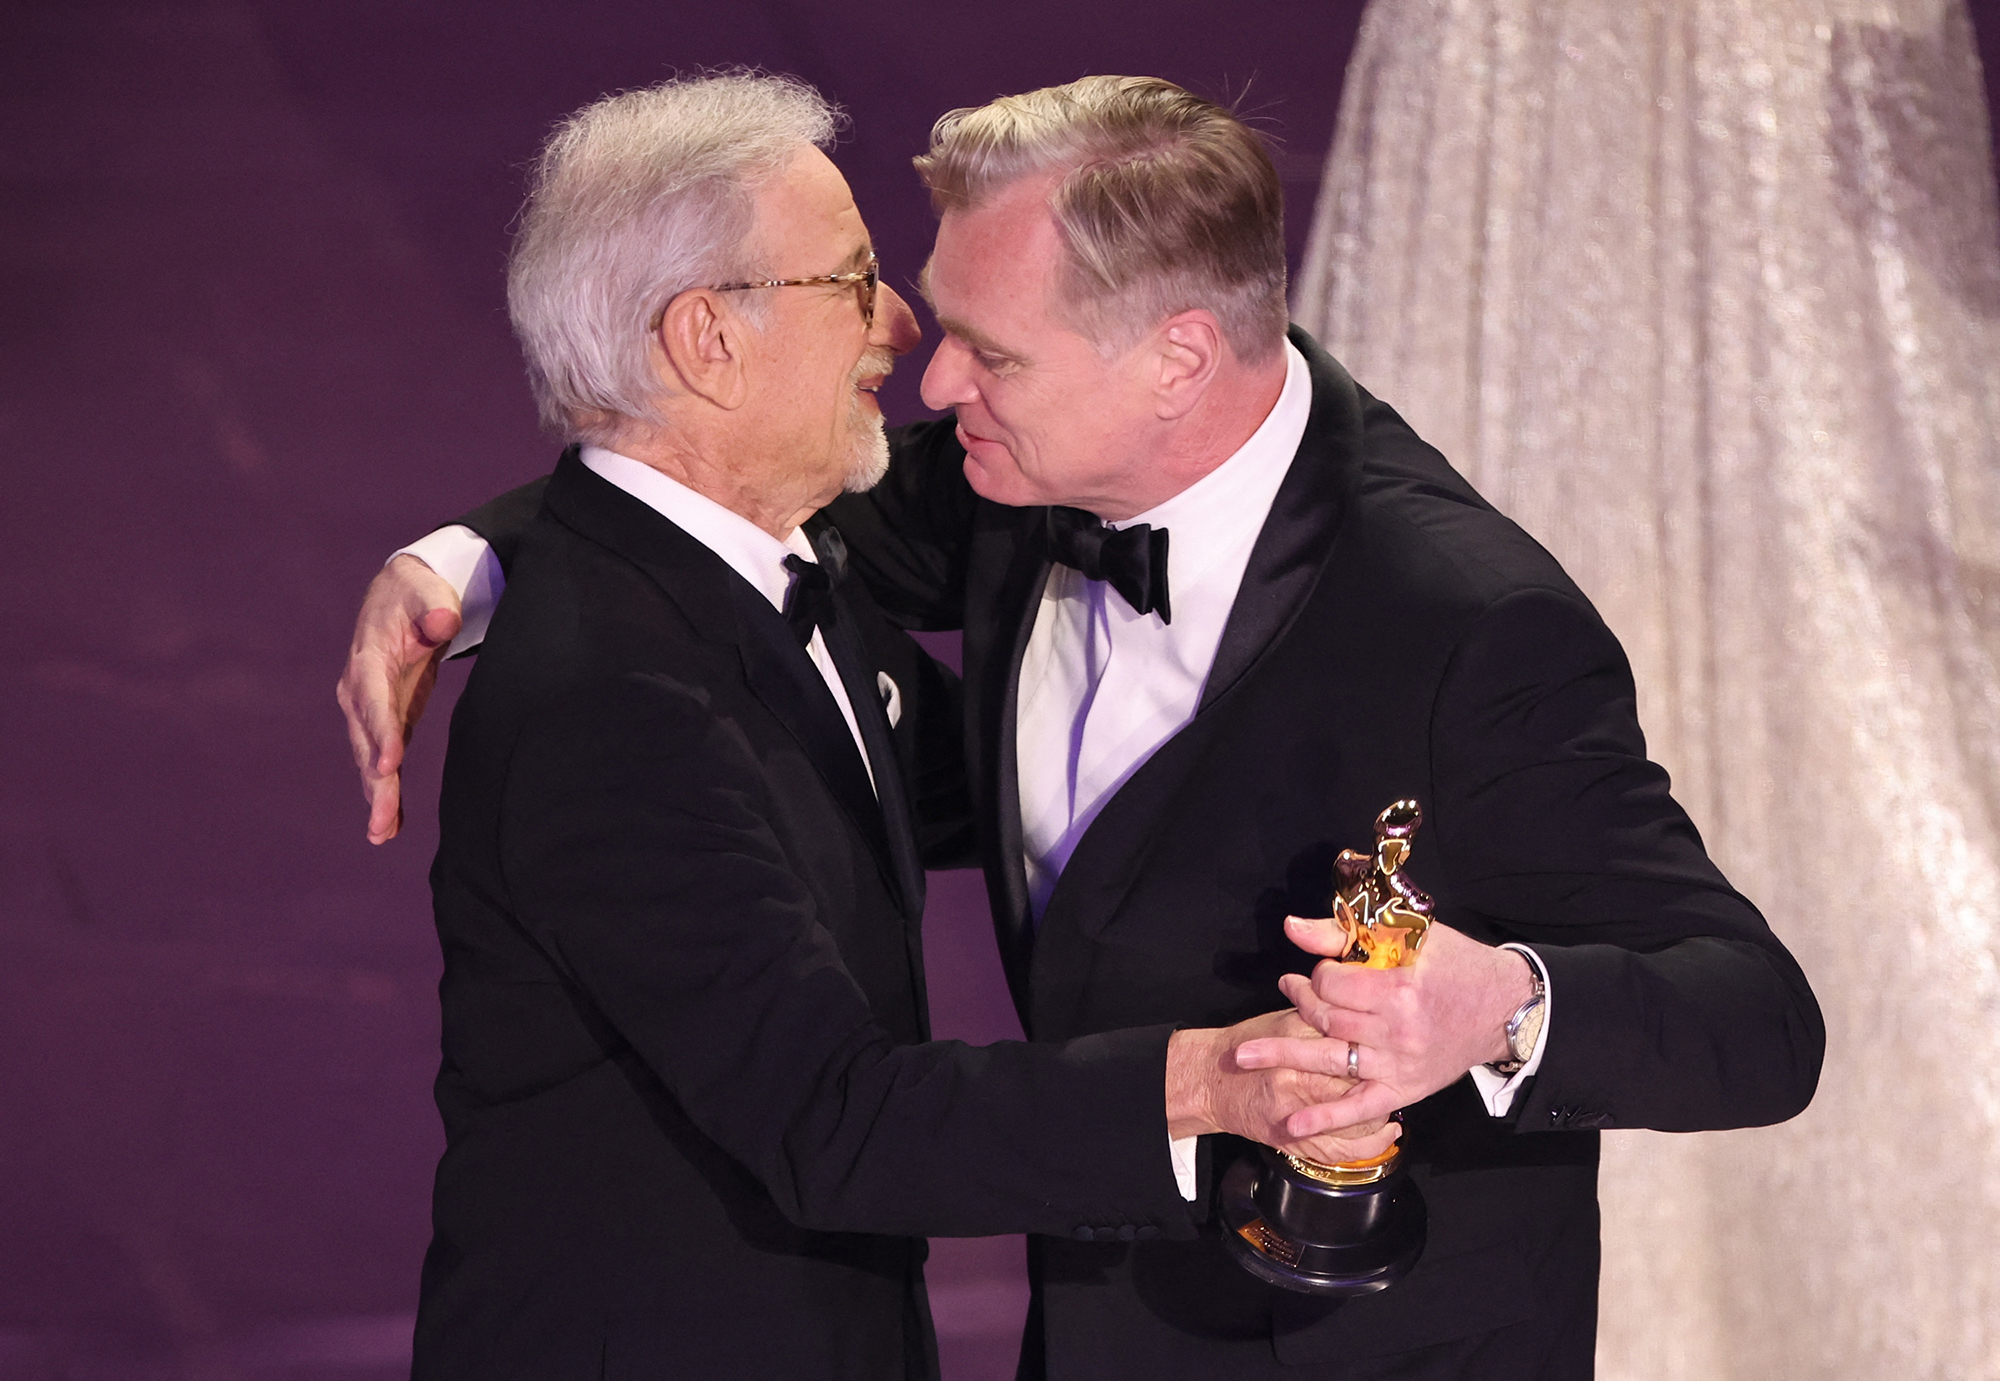 Steven Spielberg presents Christopher Nolan with the Oscar for best director. 